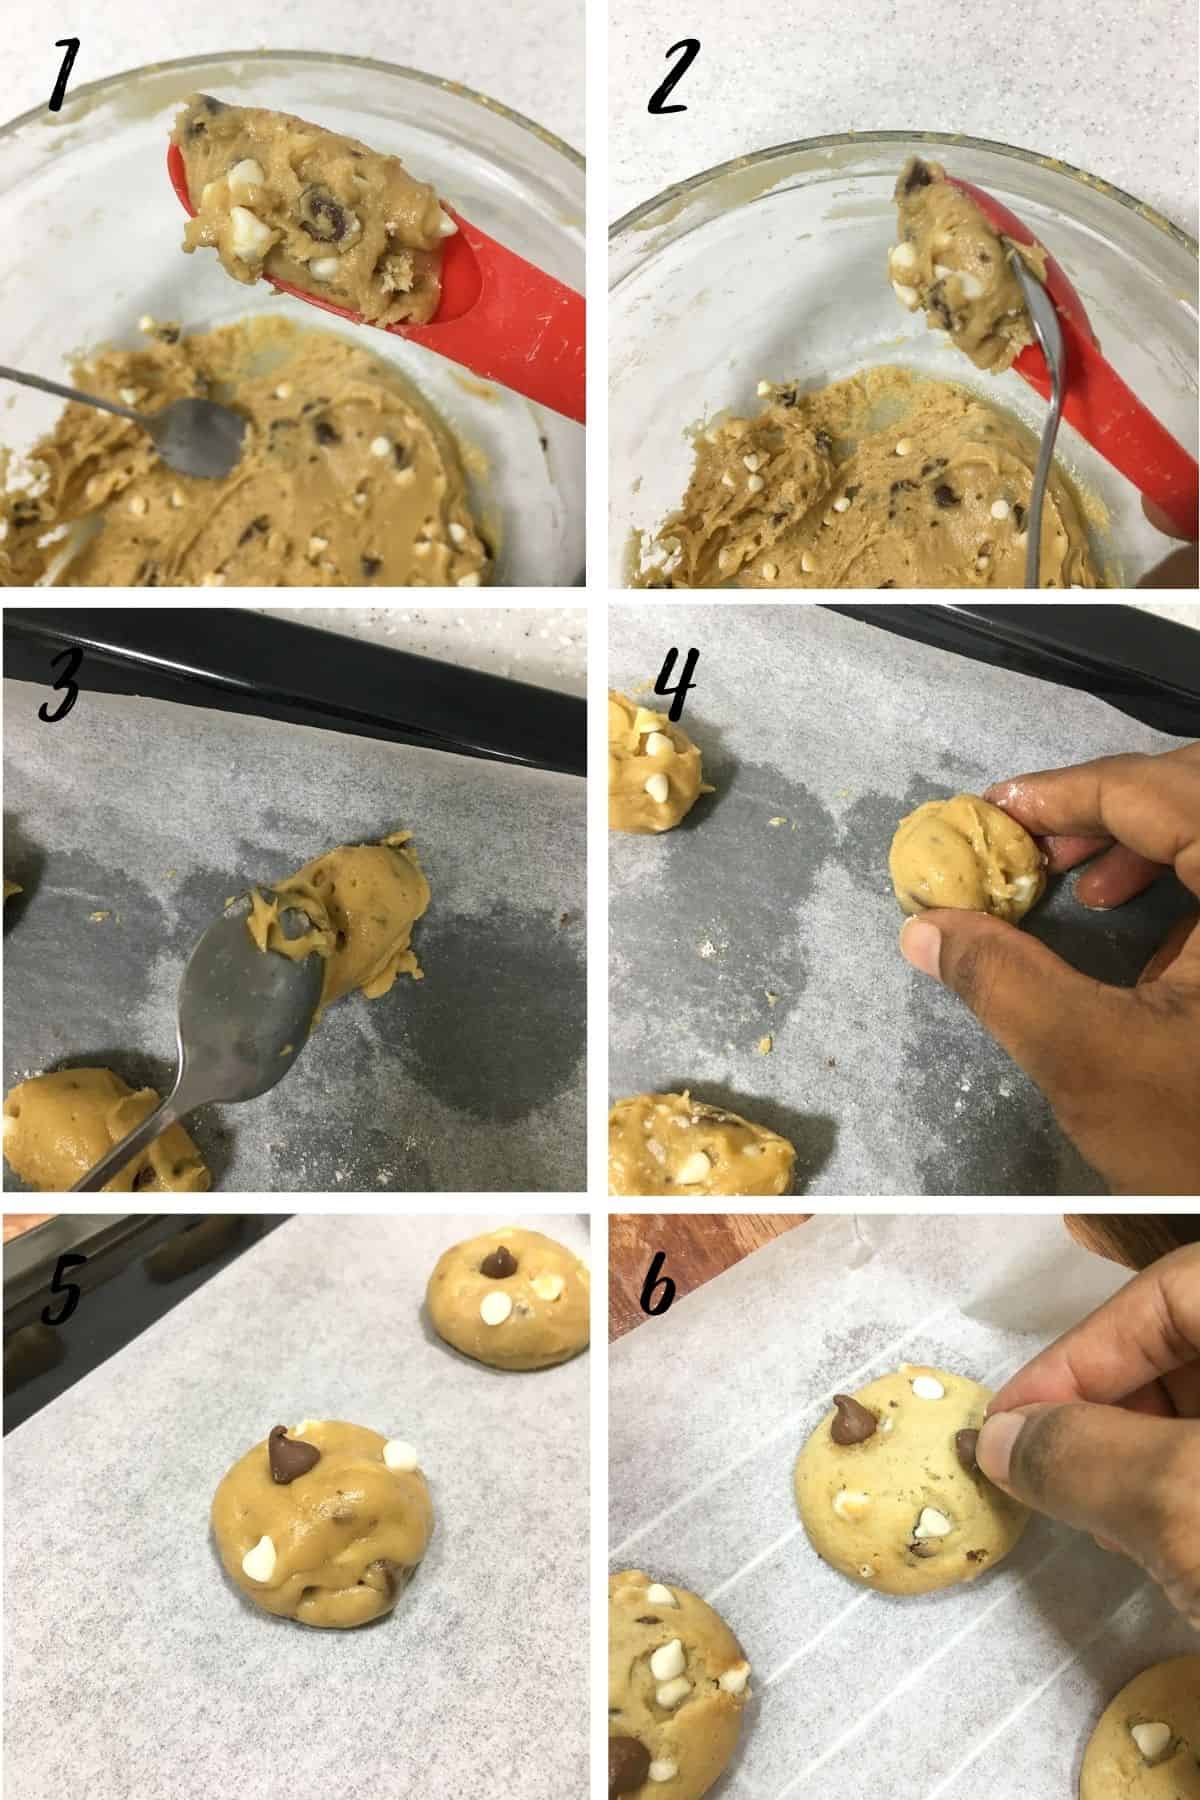 A poster of 6 images showing how to shape chocolate chip cookies and adding extra chocolate chips to baked cookies